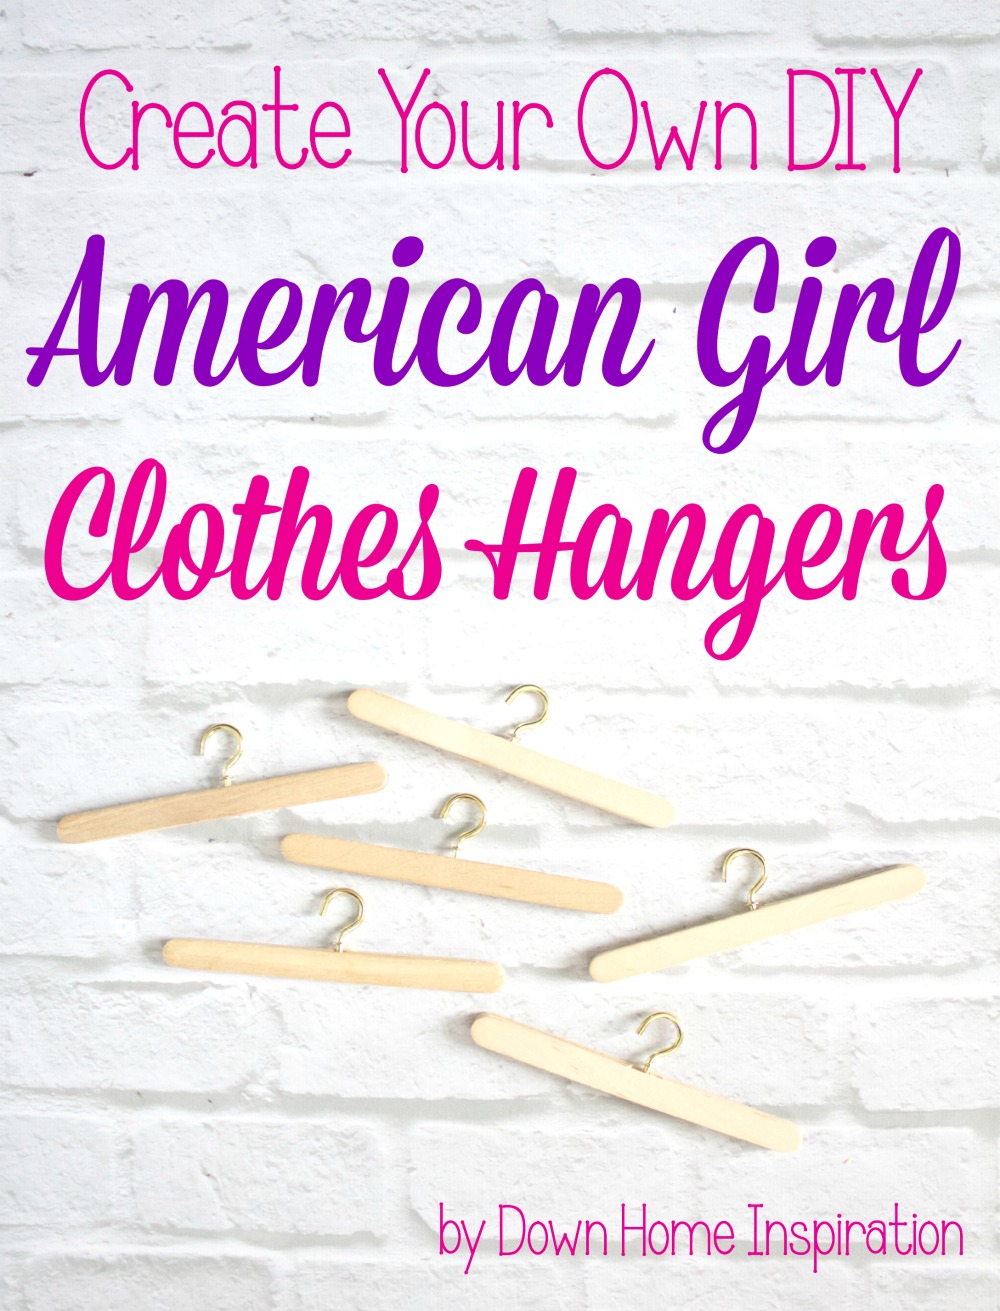 DIY Barbie or Doll Wooden Dollar Tree Clothes Rack with Hangers